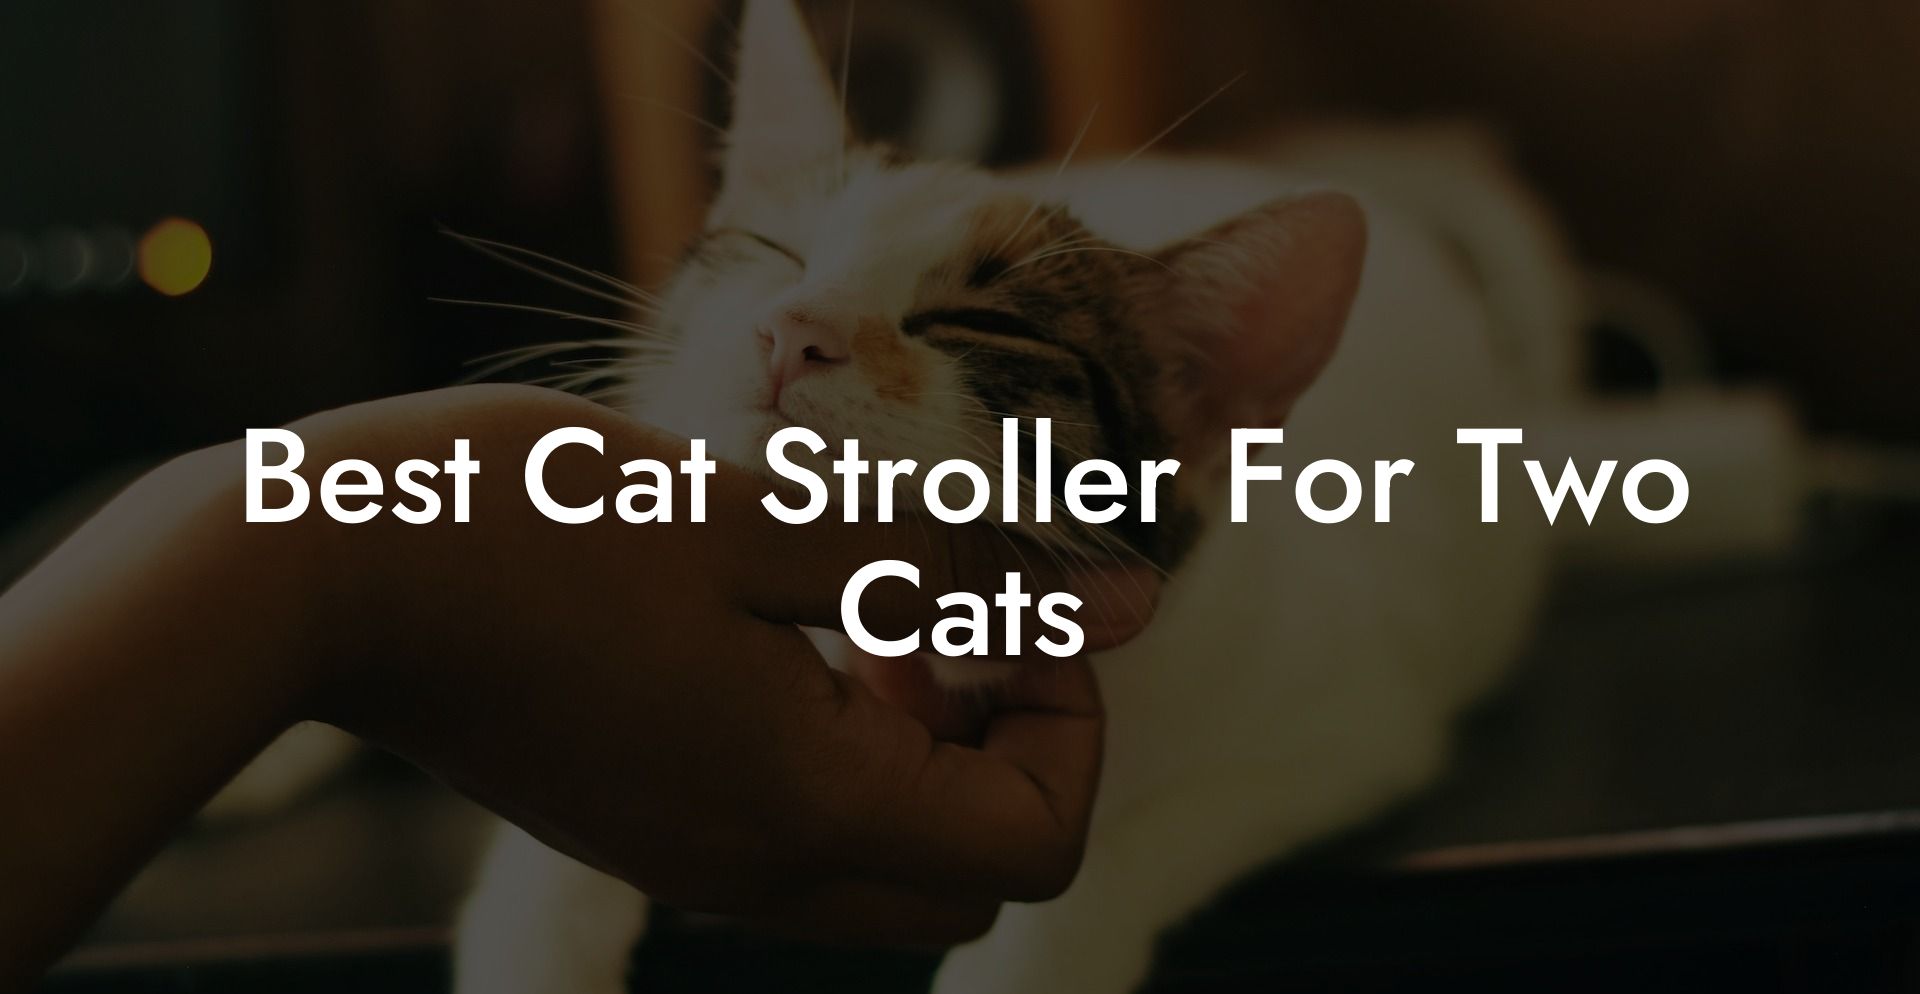 Best Cat Stroller For Two Cats